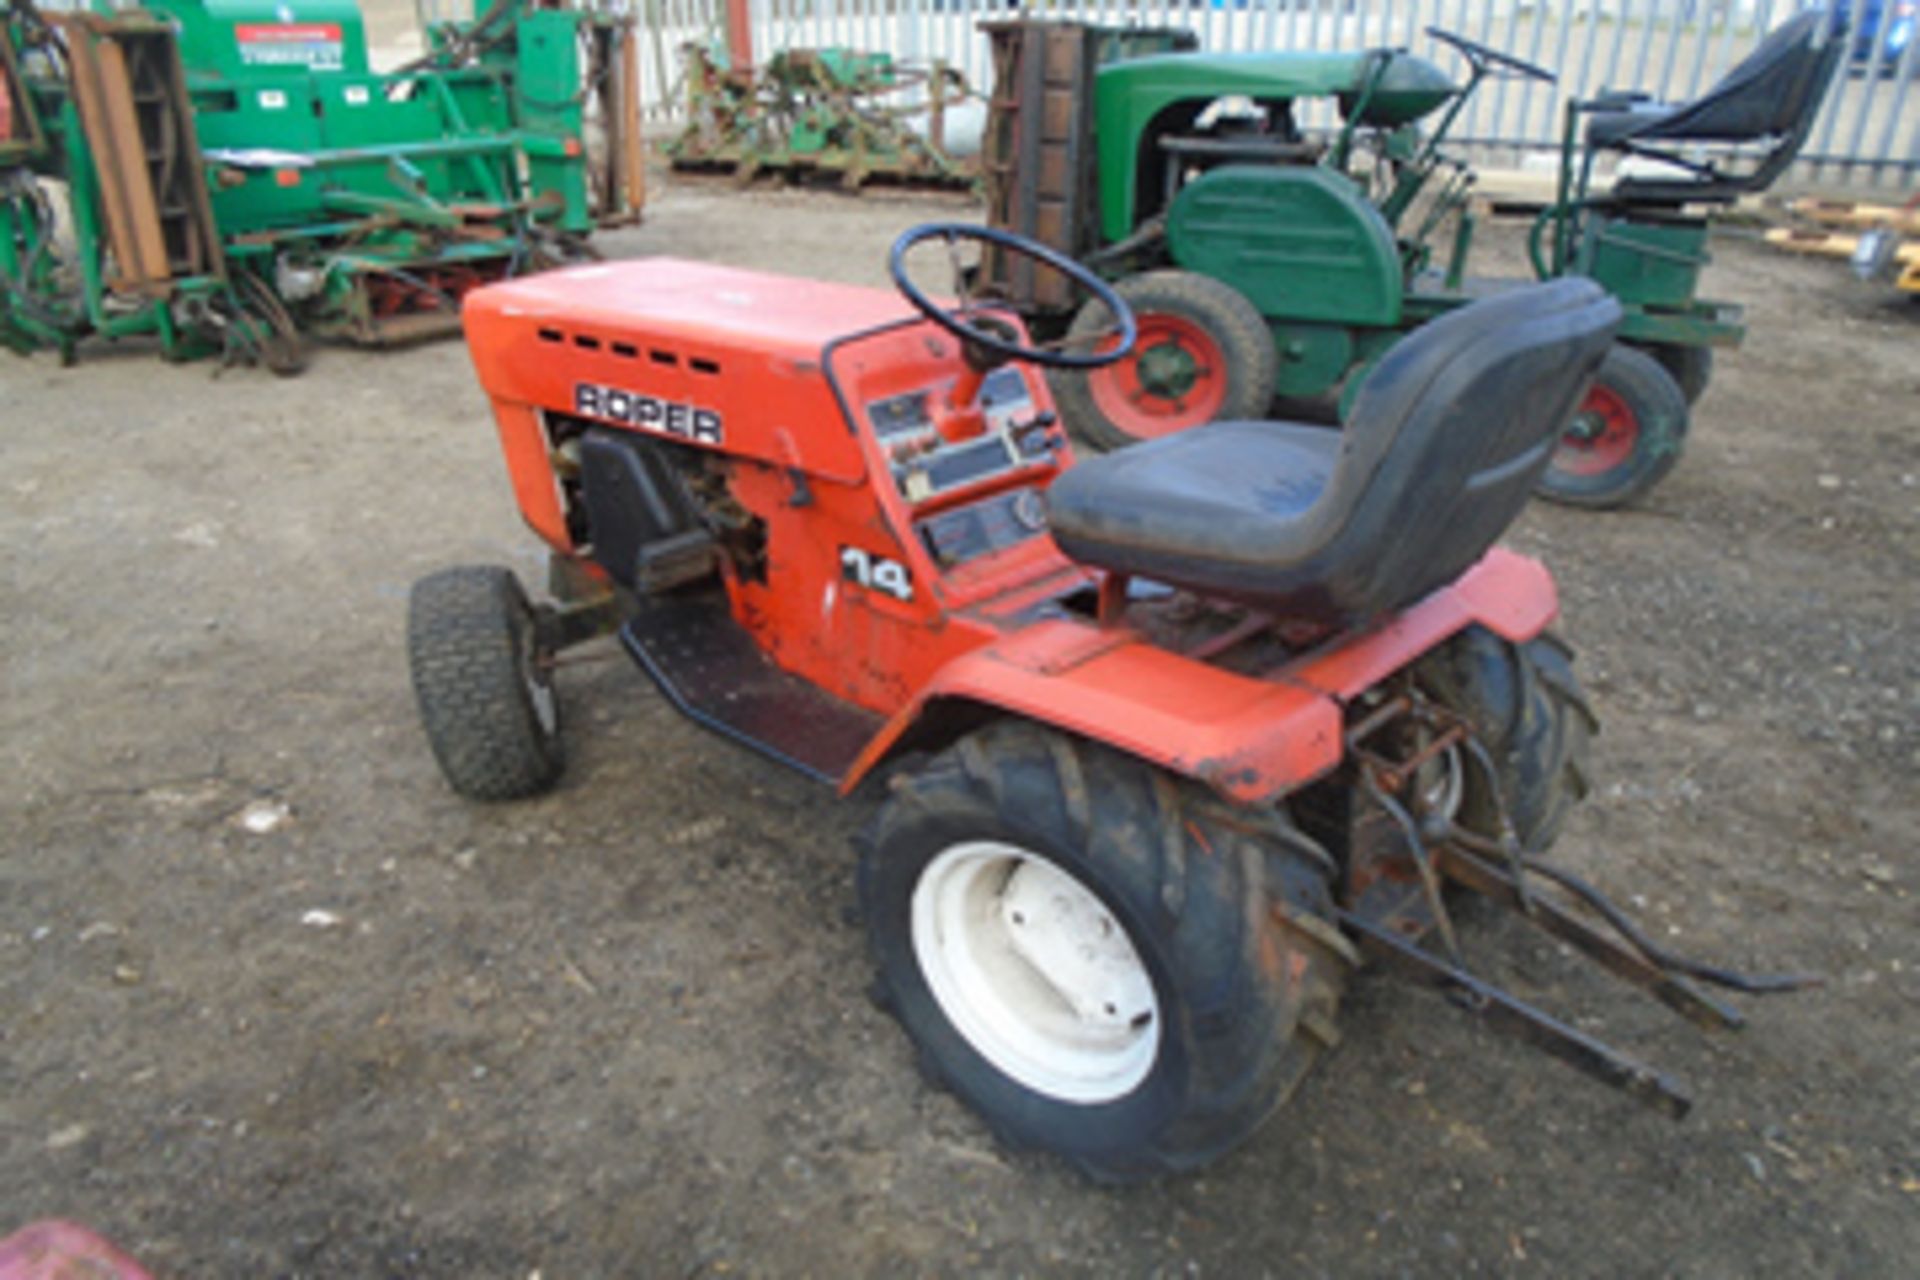 Roper 14 mini tractor with grass cutter and snow plough attachments - Image 5 of 8